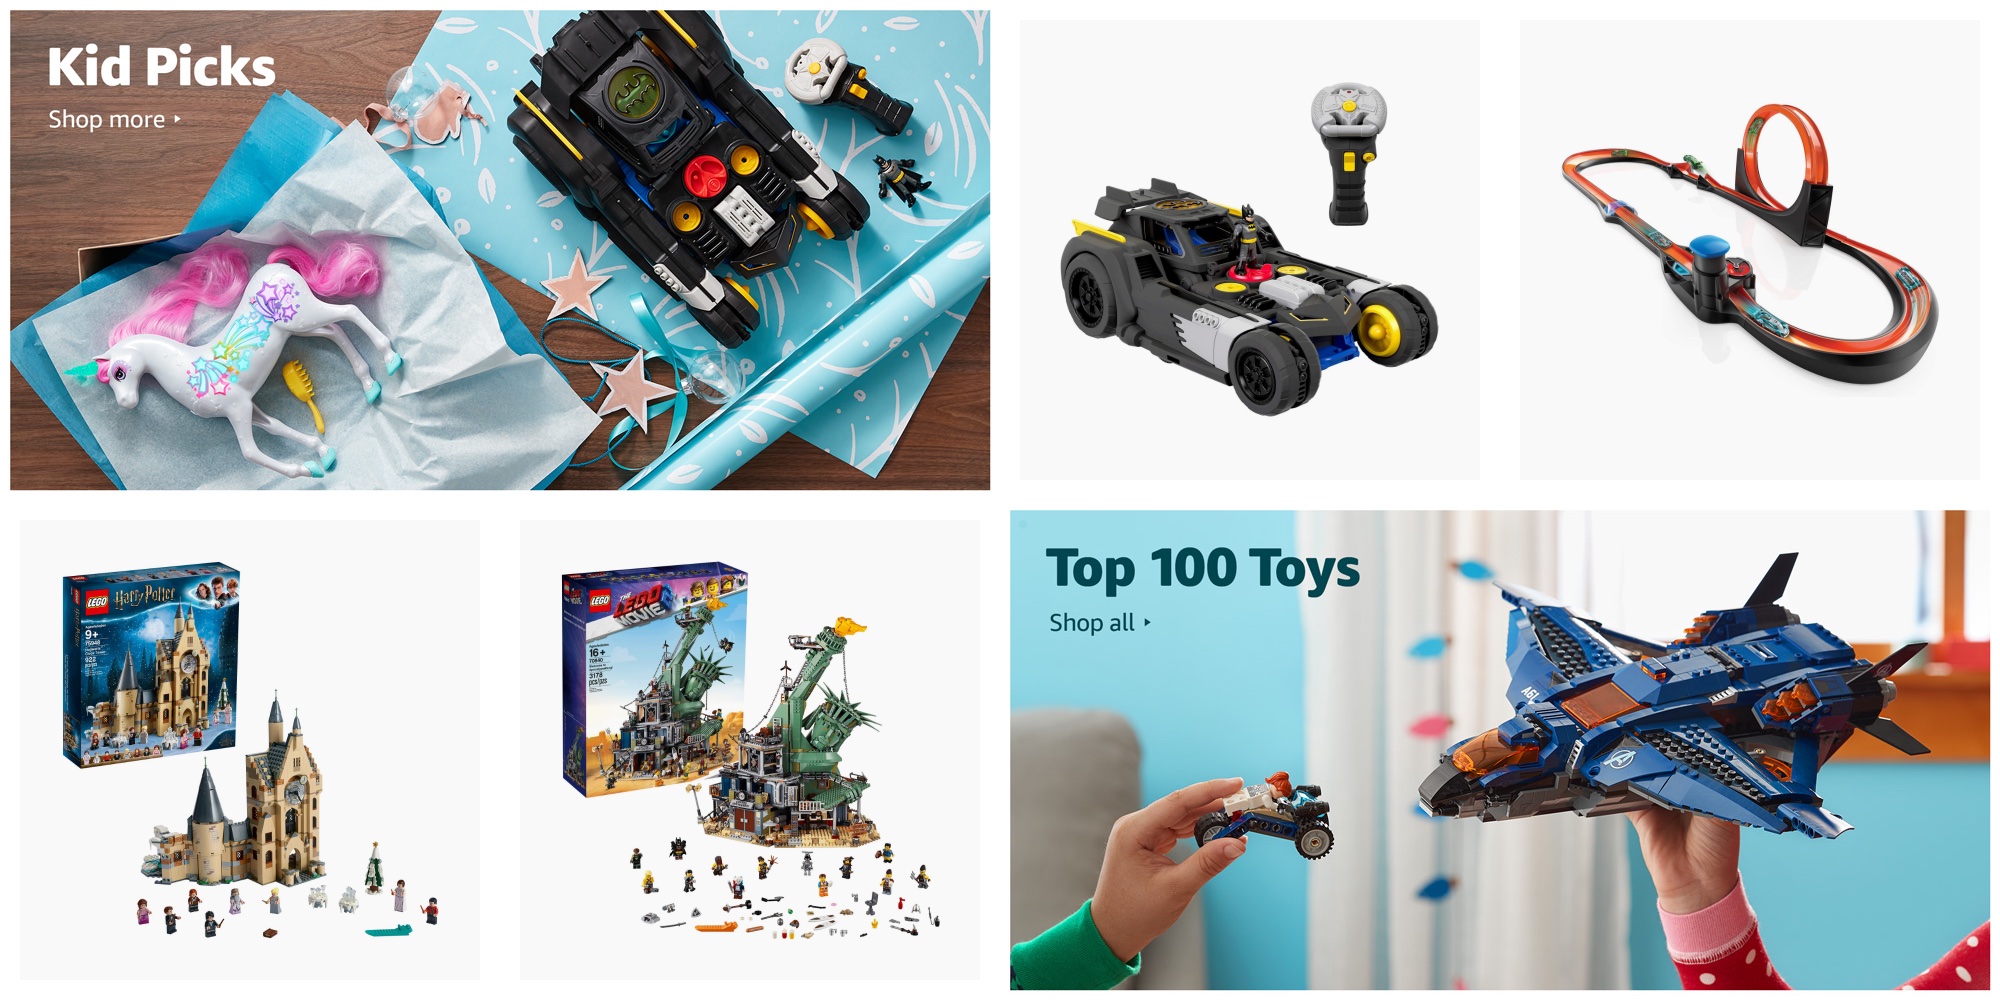 Amazon Holiday Toy List arrives with 2019 musthaves 9to5Toys